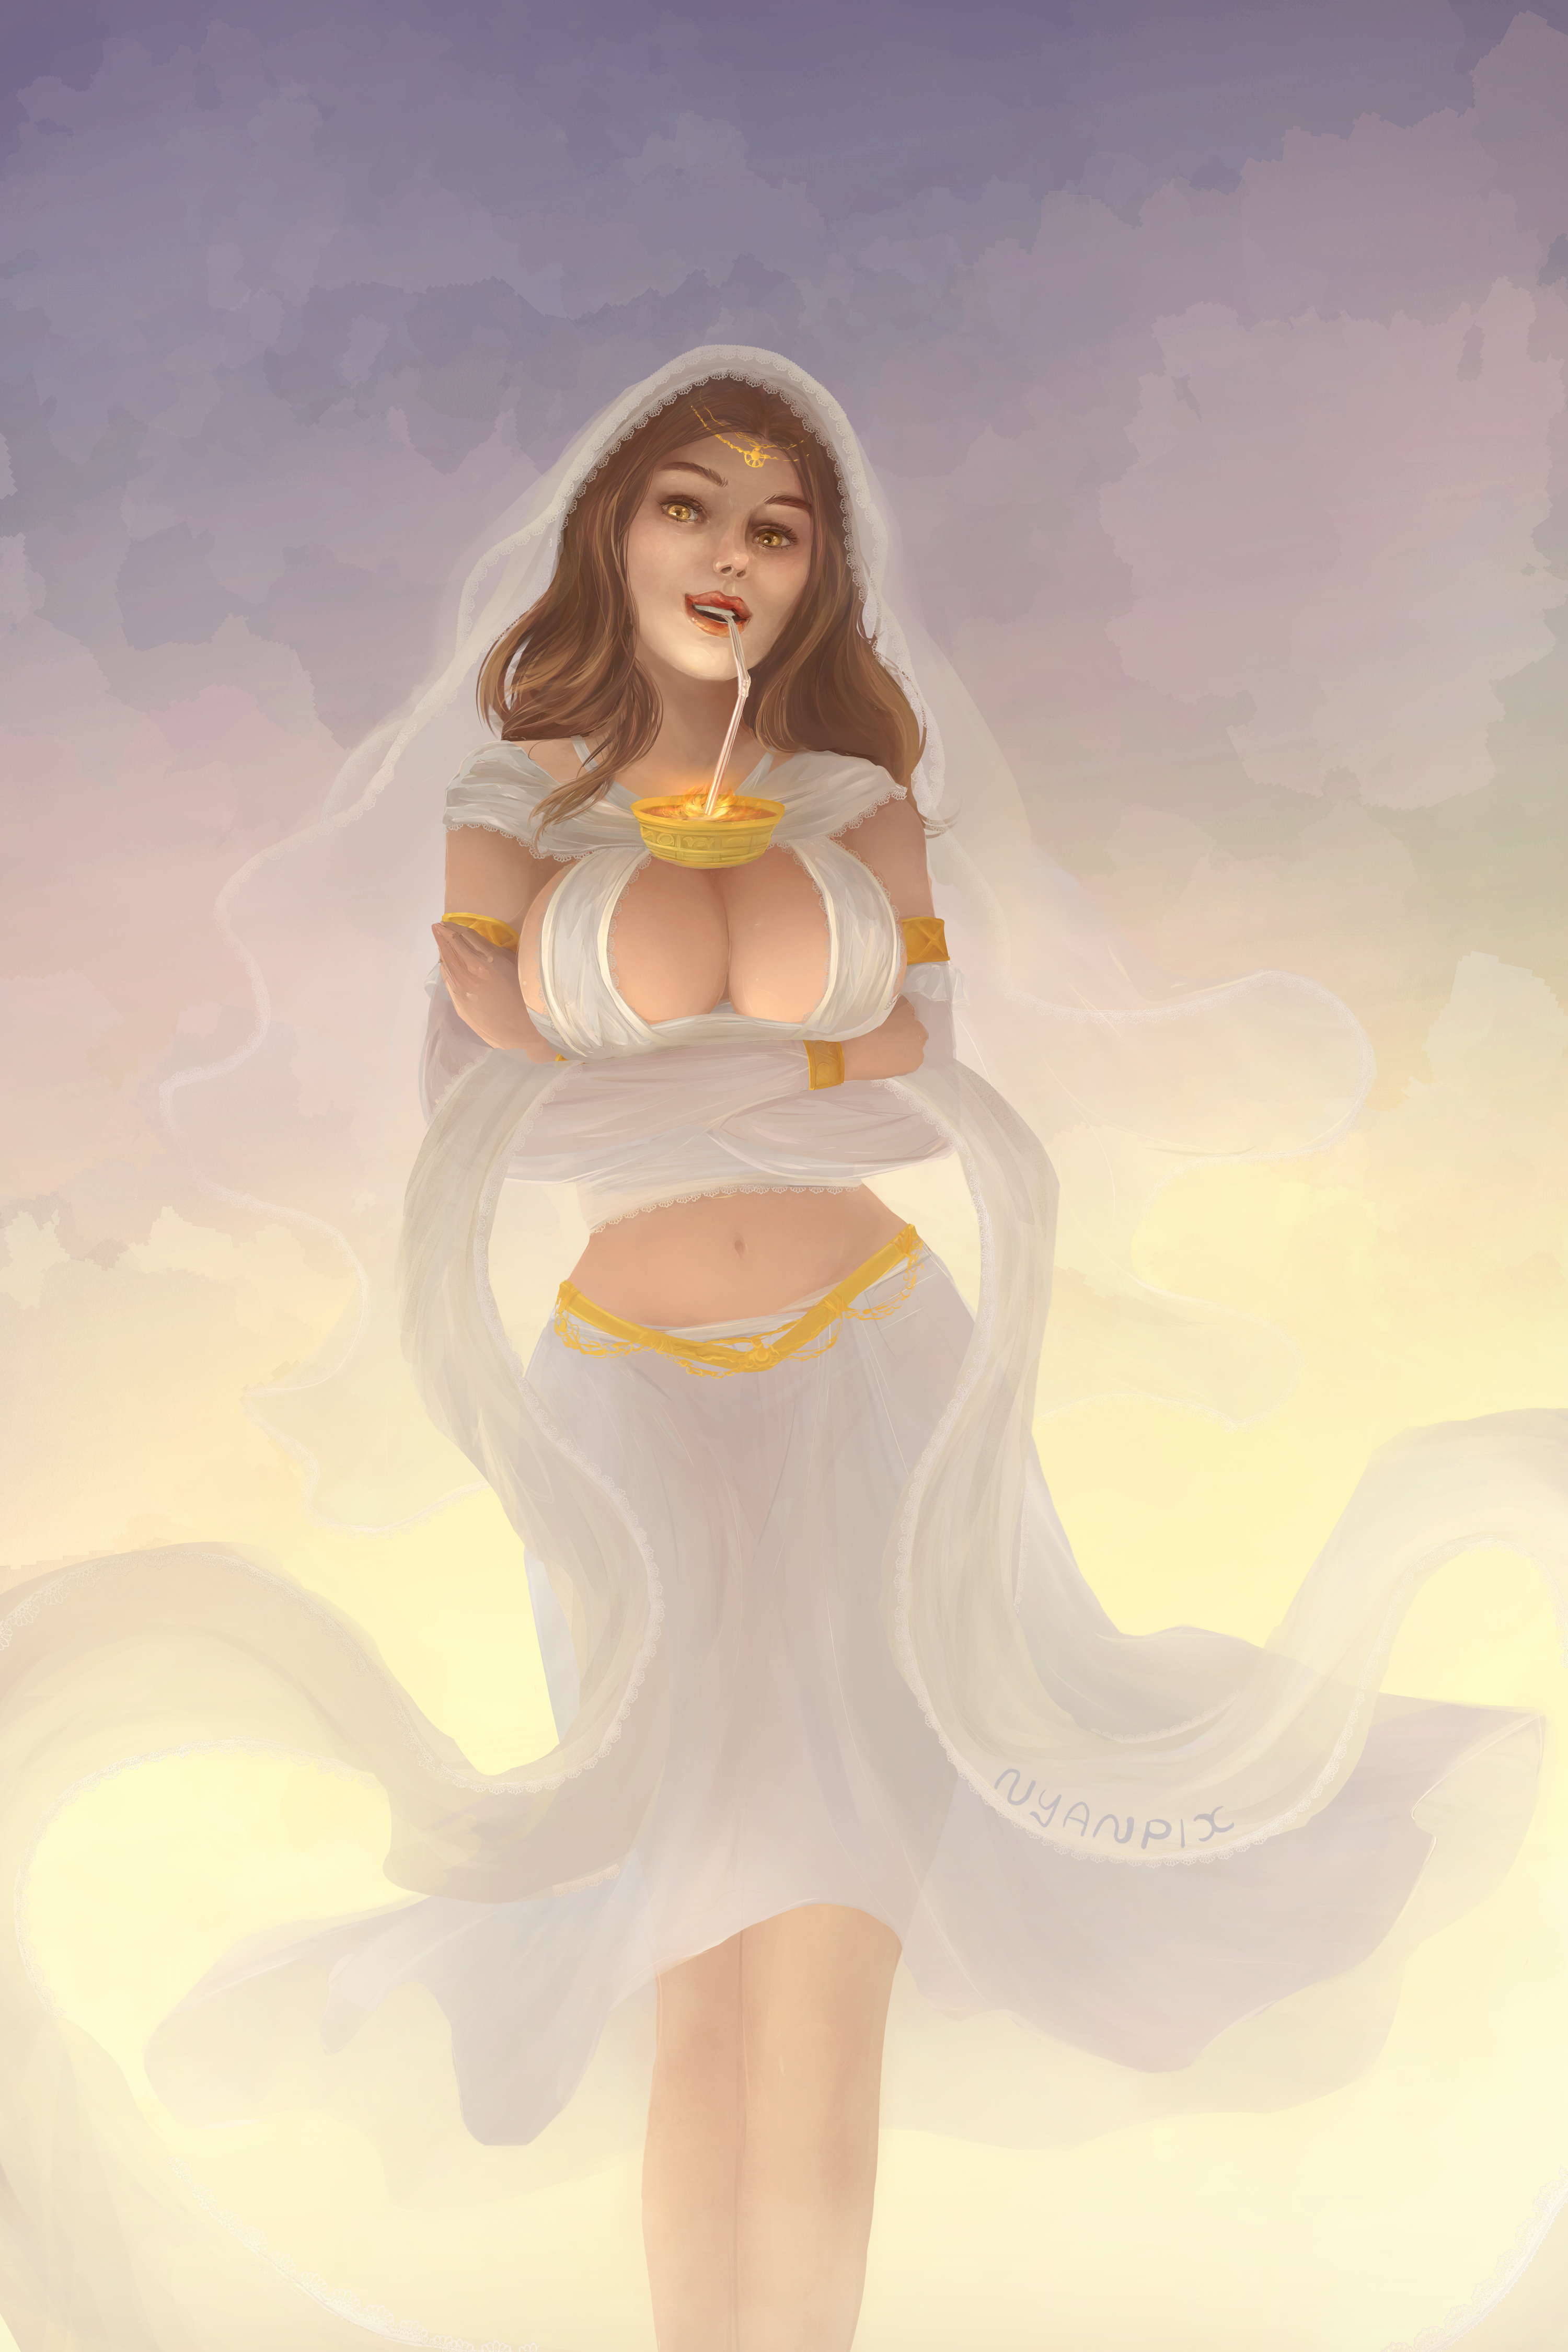 queen of sunlight gwynevere, dark souls, fromsoftware, arms crossed under b...